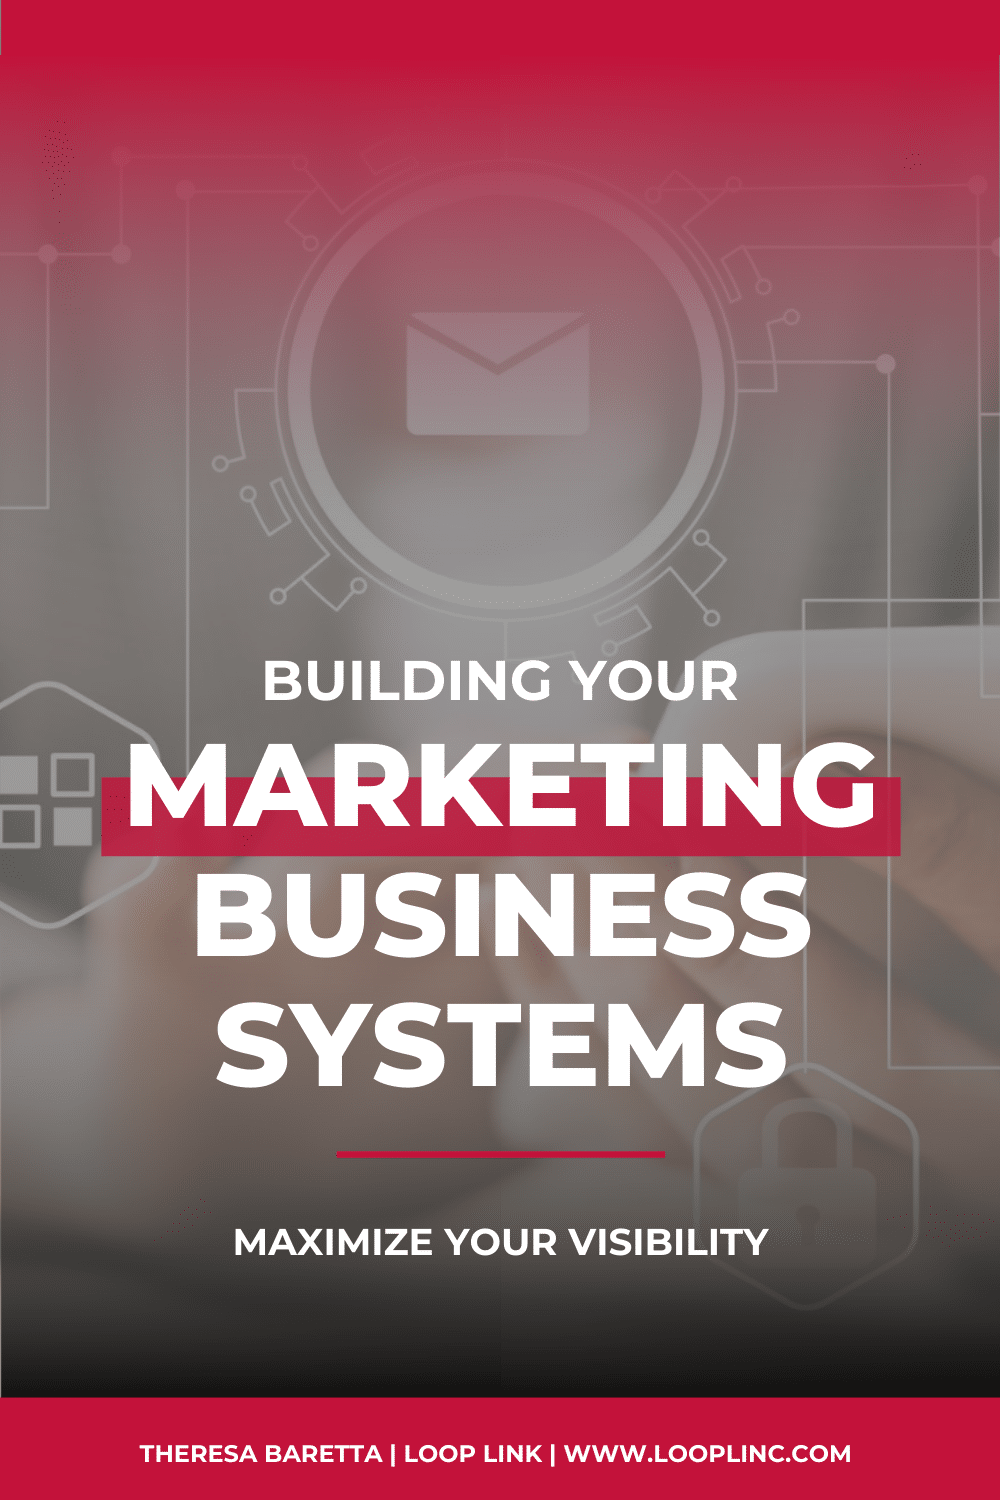 Building Your Marketing Business Systems